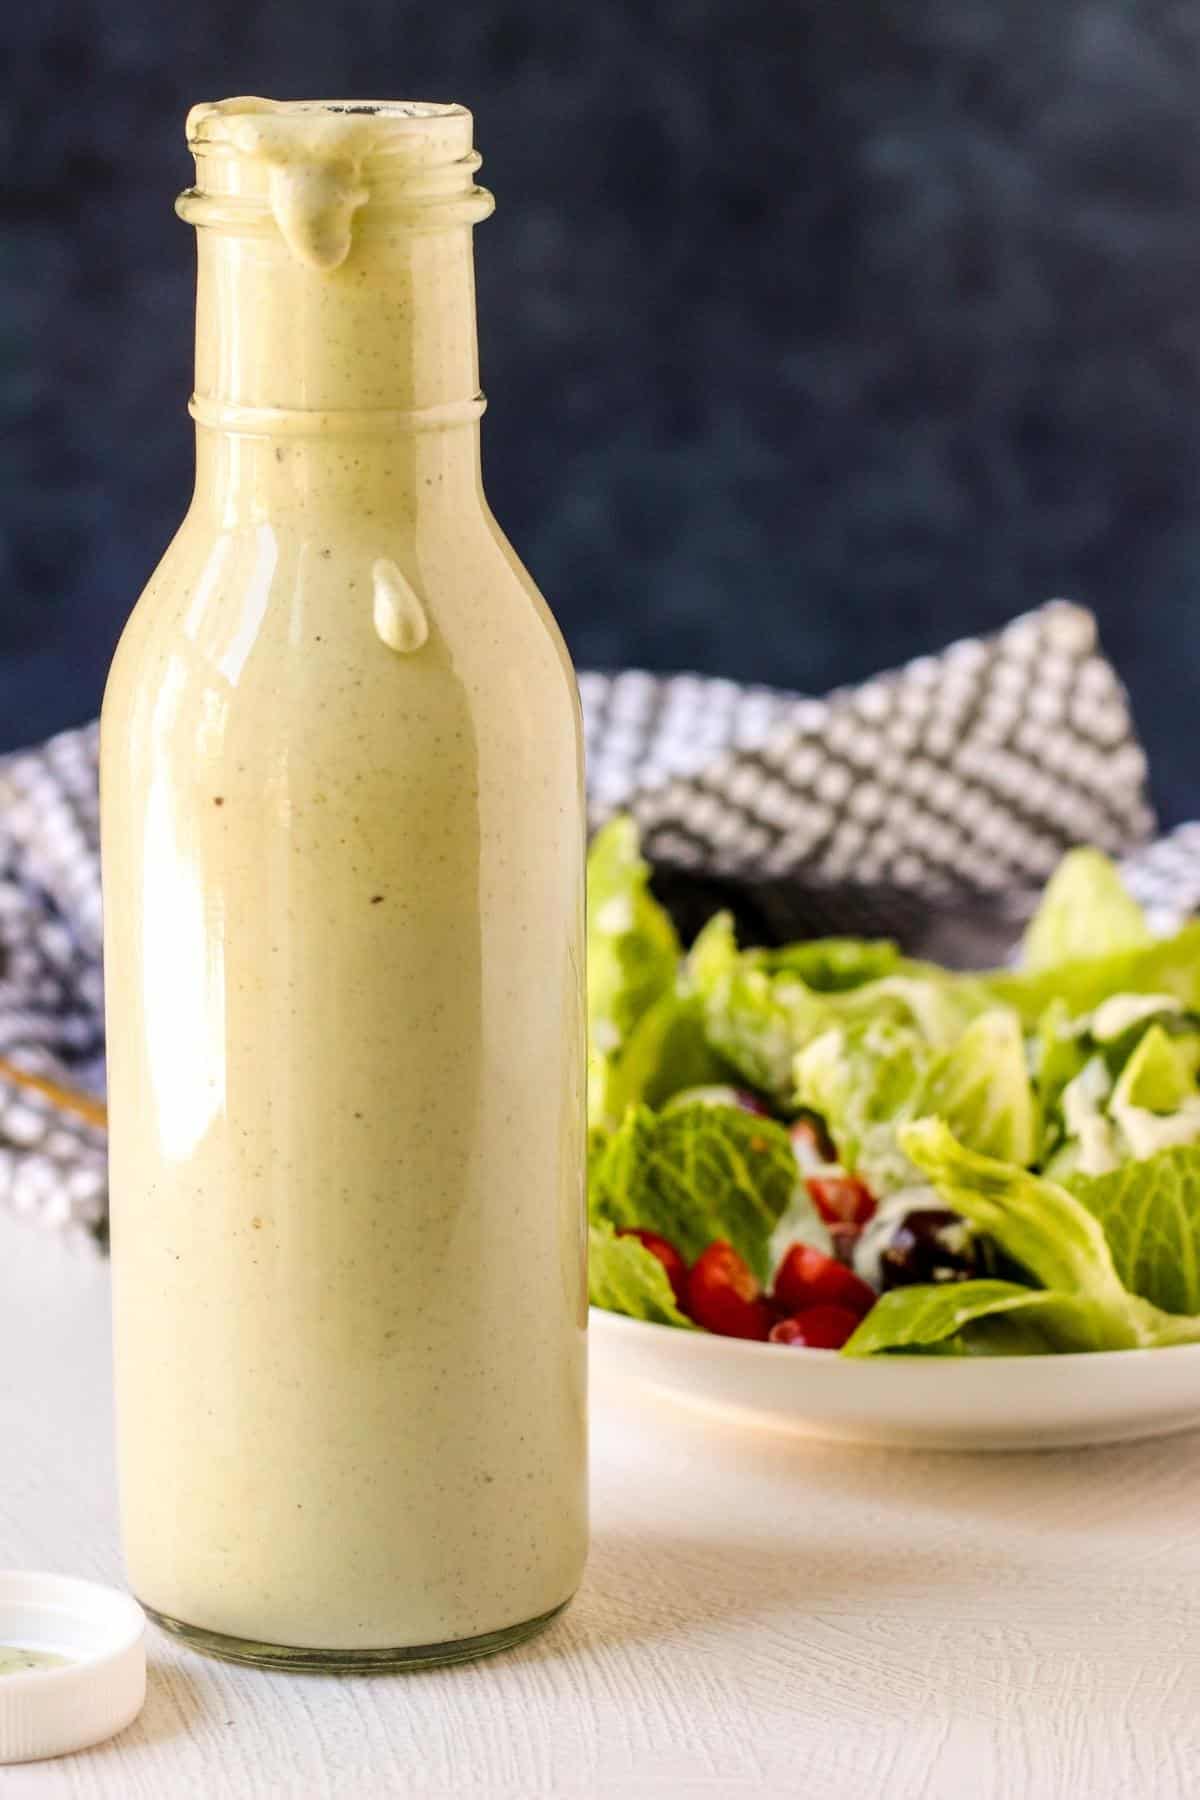 Bottle of ranch dressing with salad in the background.